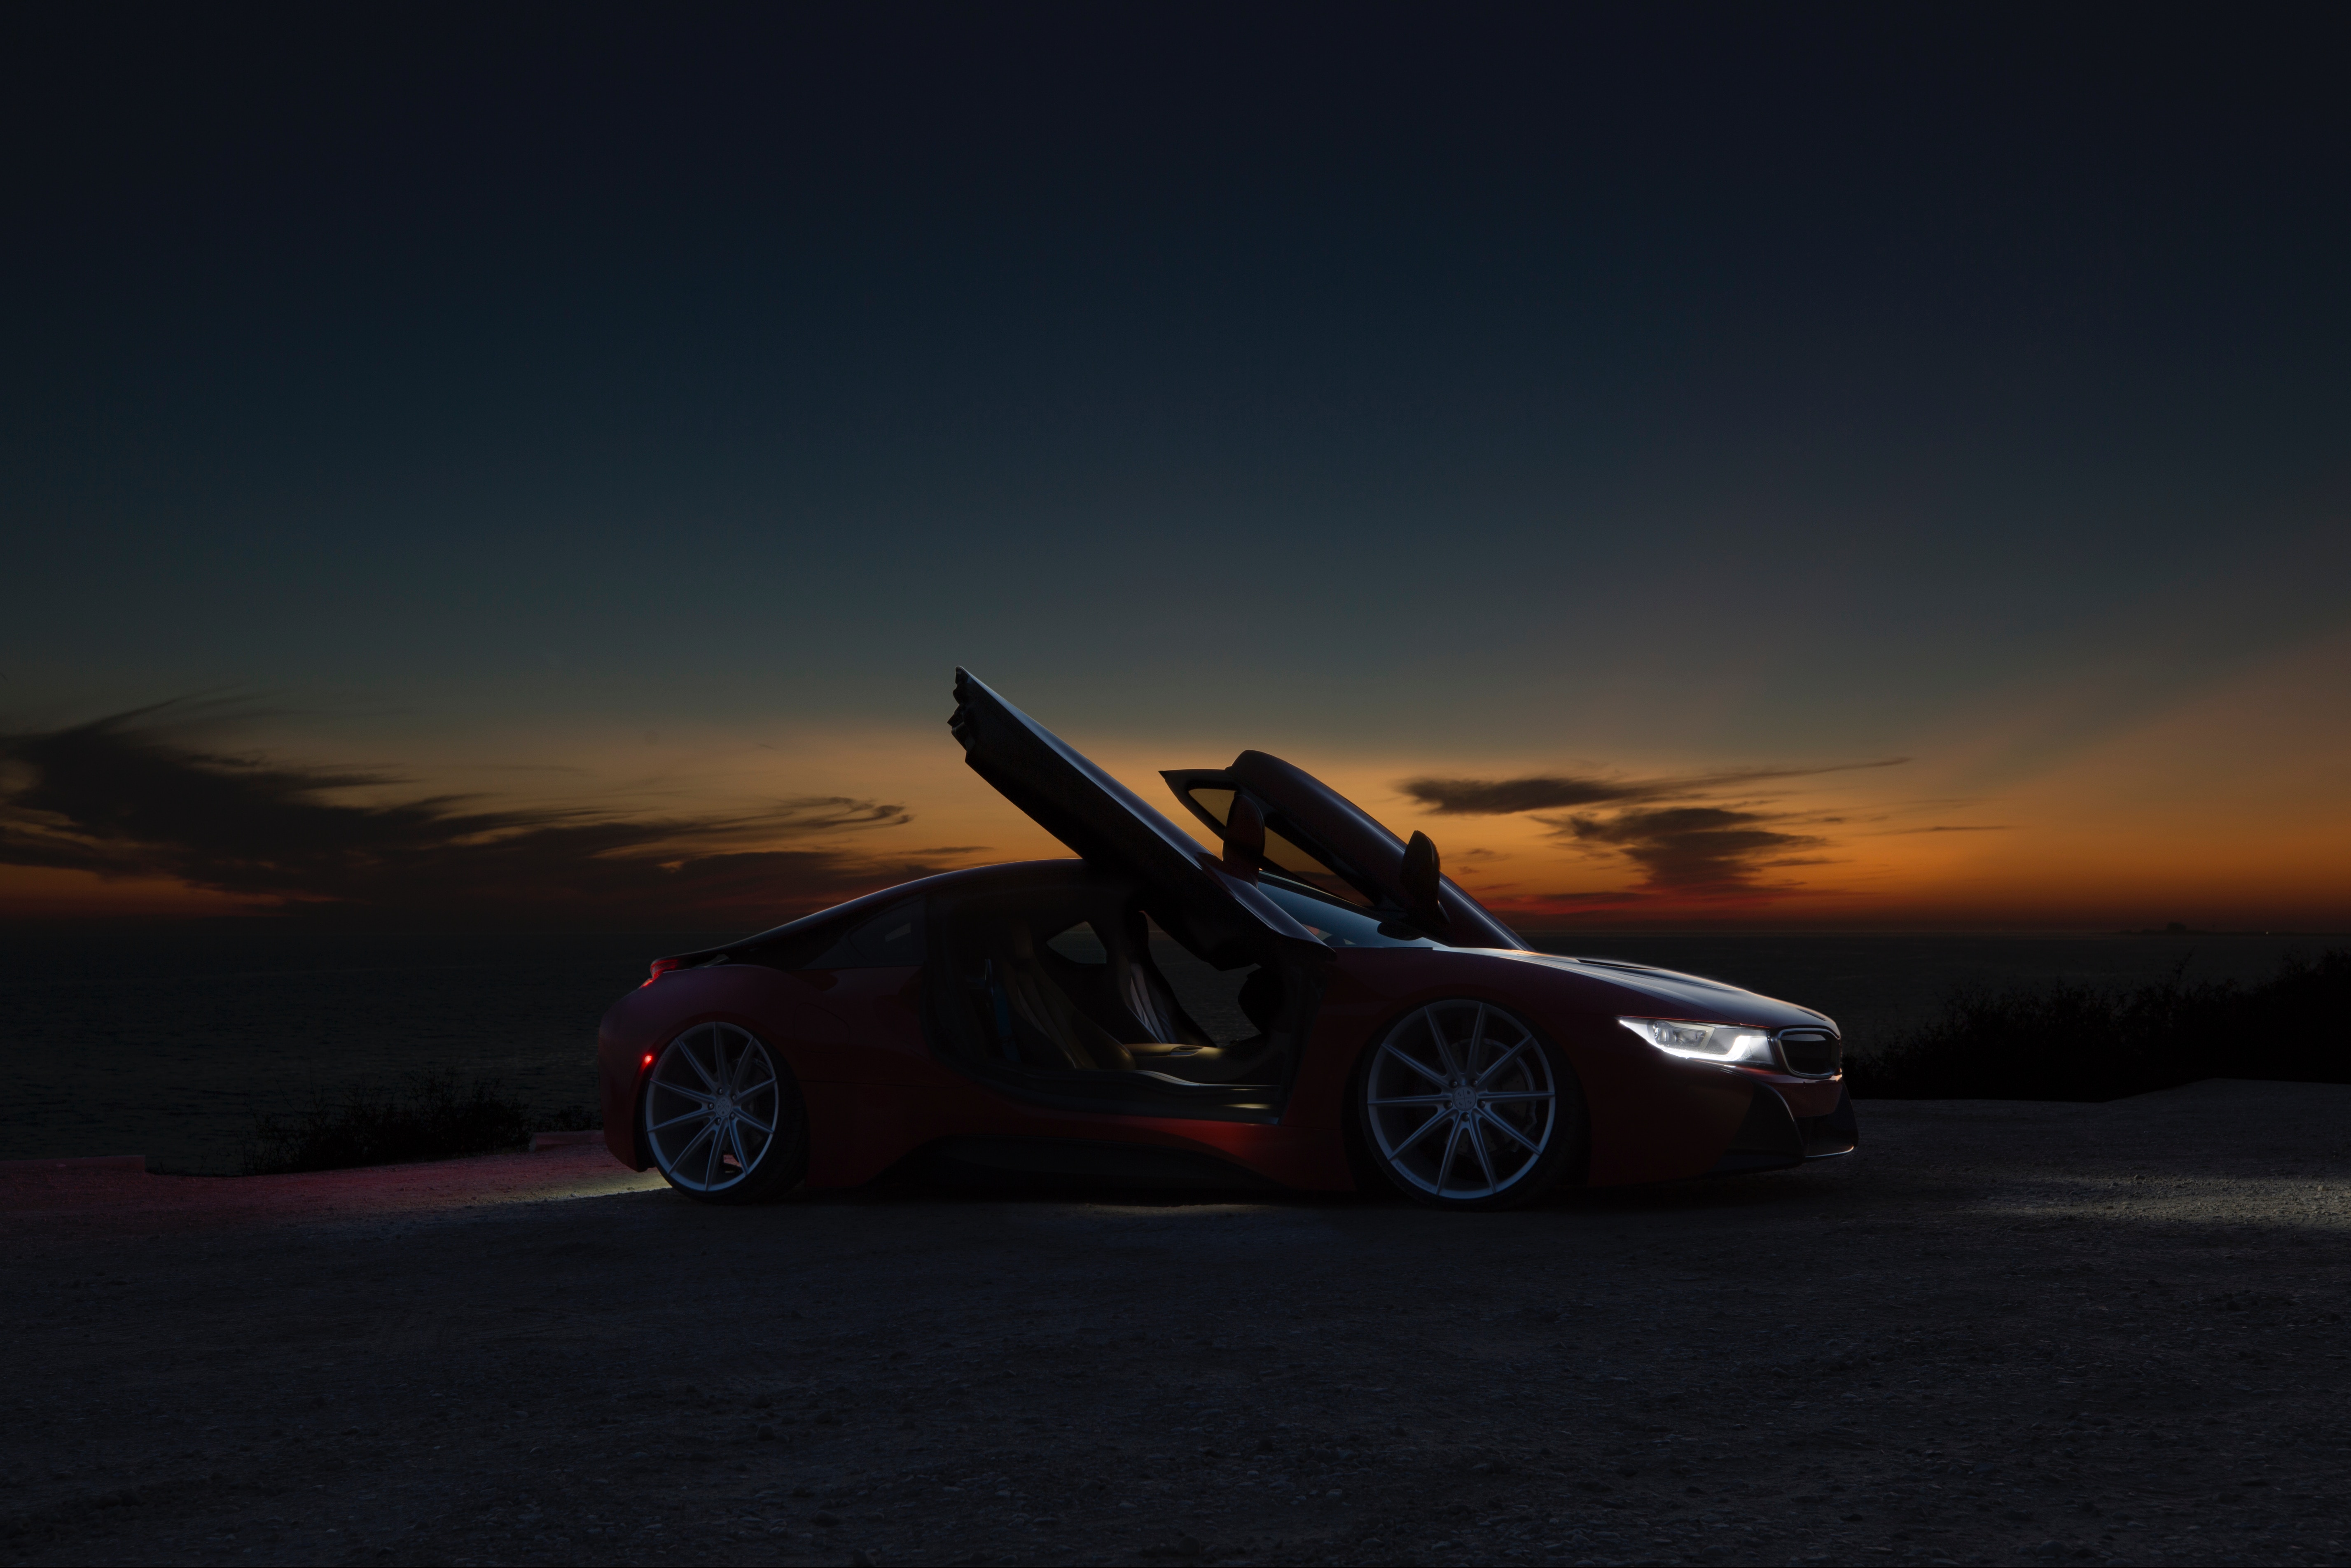 android cars, supercar, sports car, sports, sunset, night, car